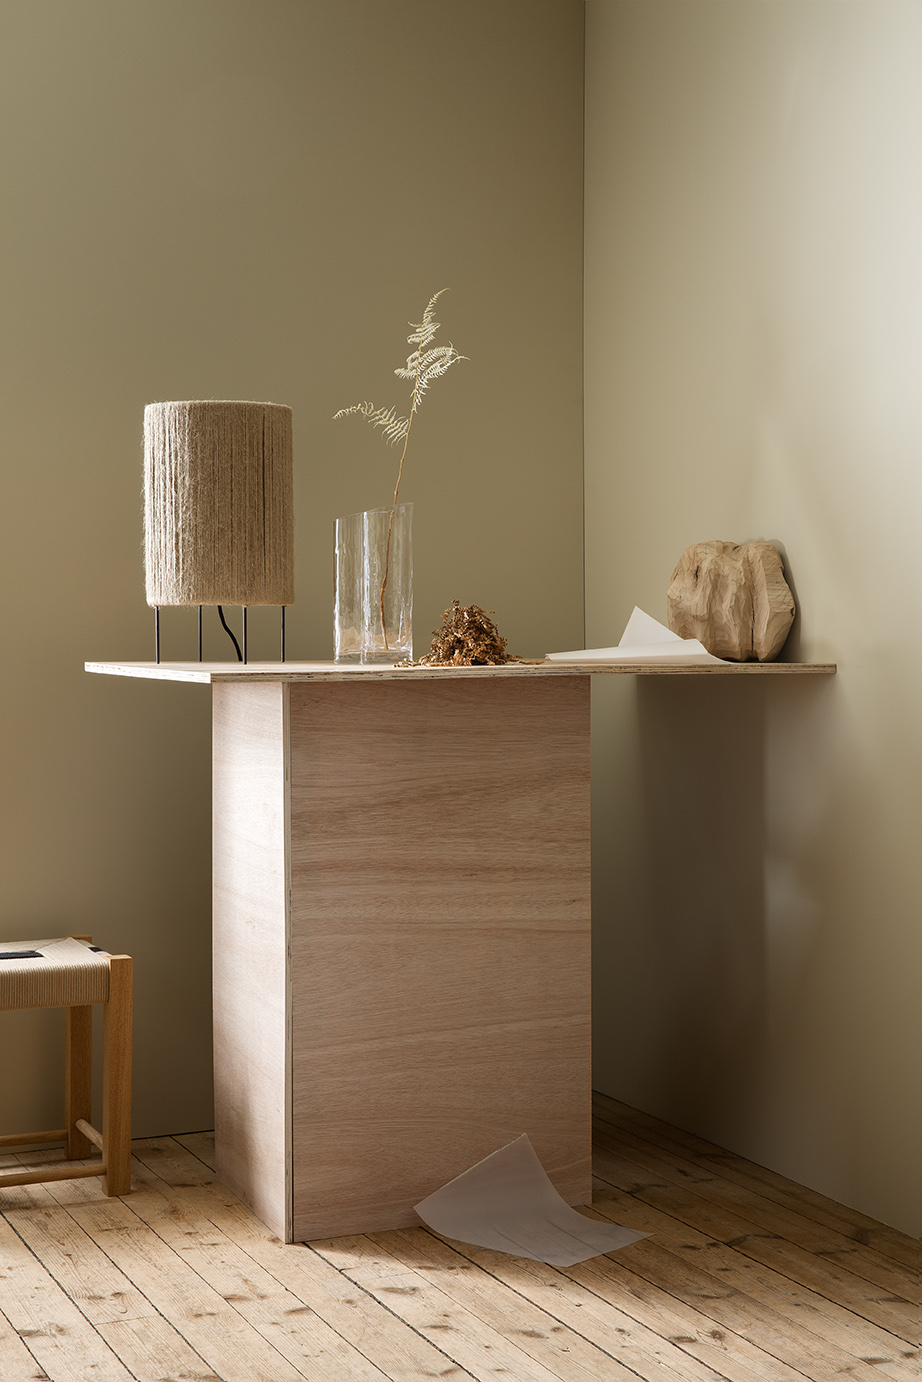 Neutral coloured walls with handmade accessories made by artists on a wooden table